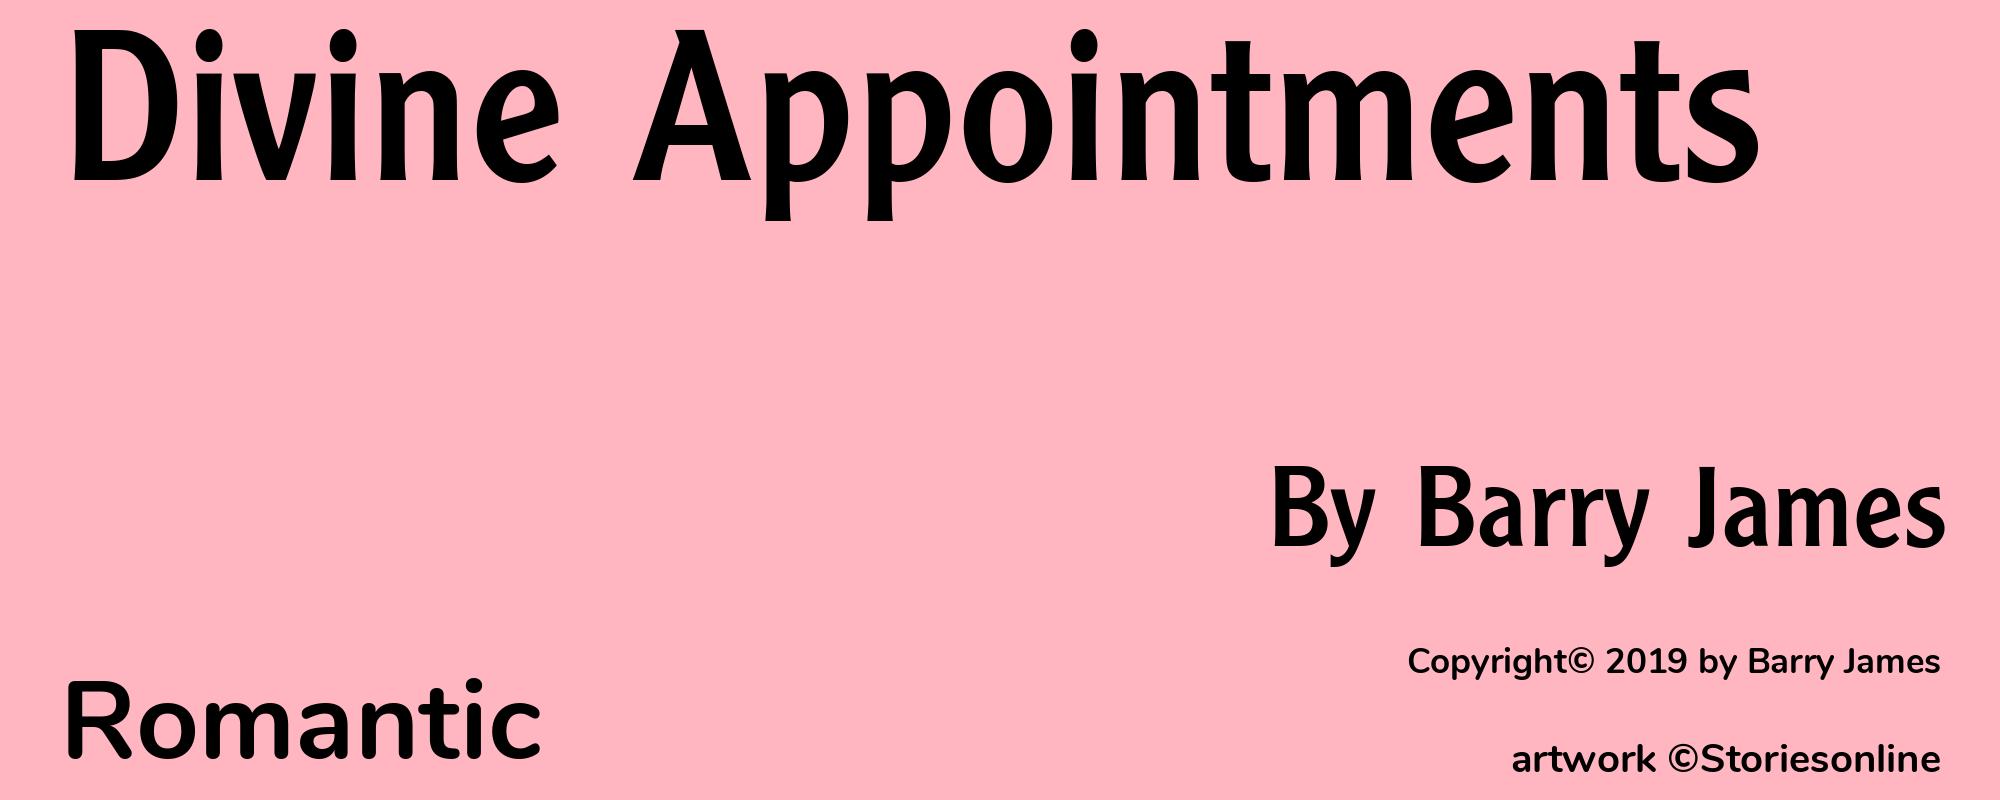 Divine Appointments - Cover